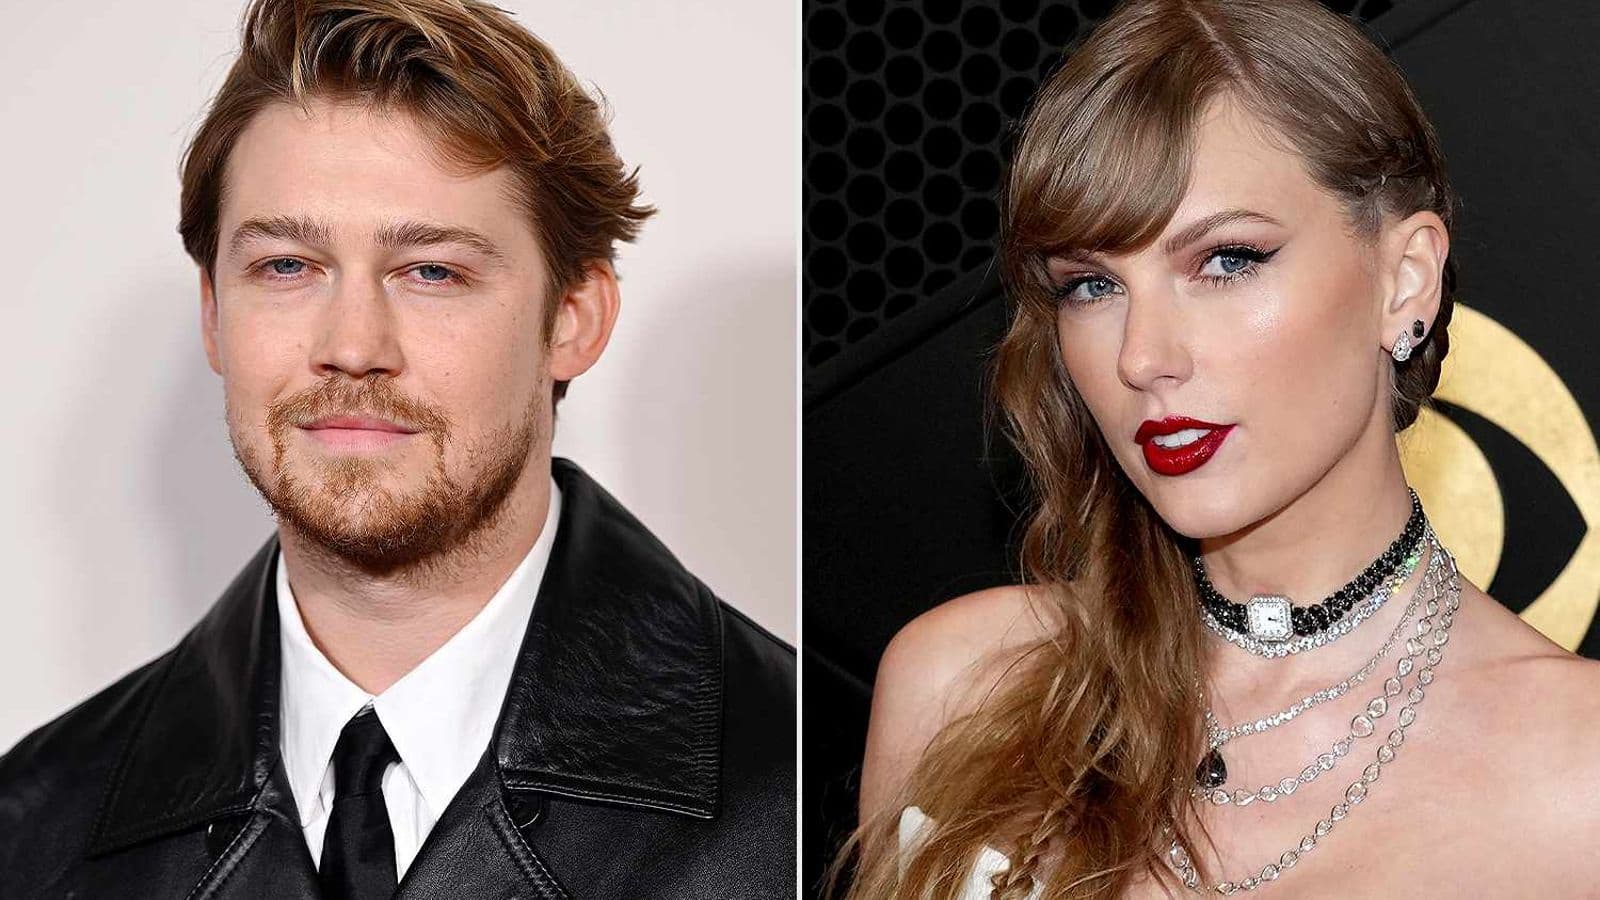 'He's dating': Joe Alwyn has moved on from Taylor Swift